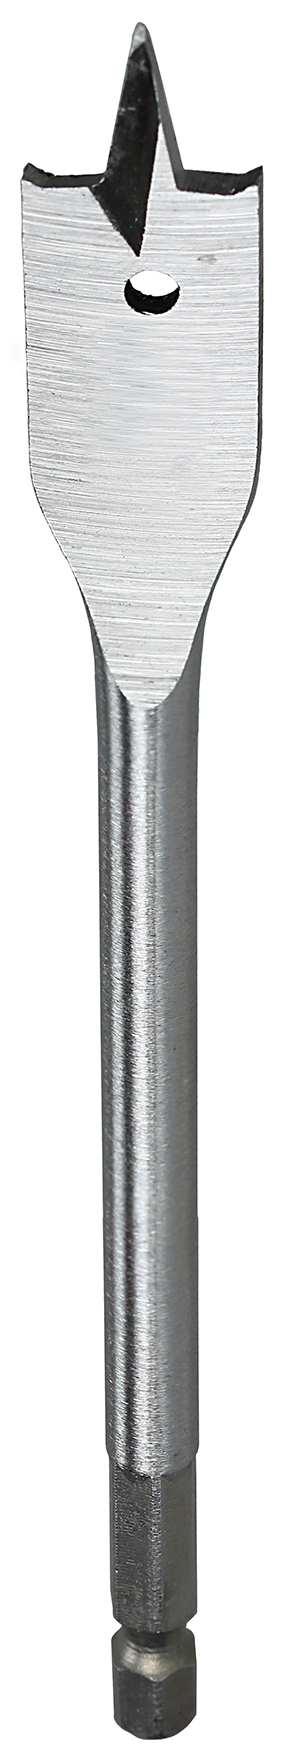 Spade Drill Bit, 3/4 in. Size, Hex shank type, Cold Forged Steel material, 6 in. drilling depth